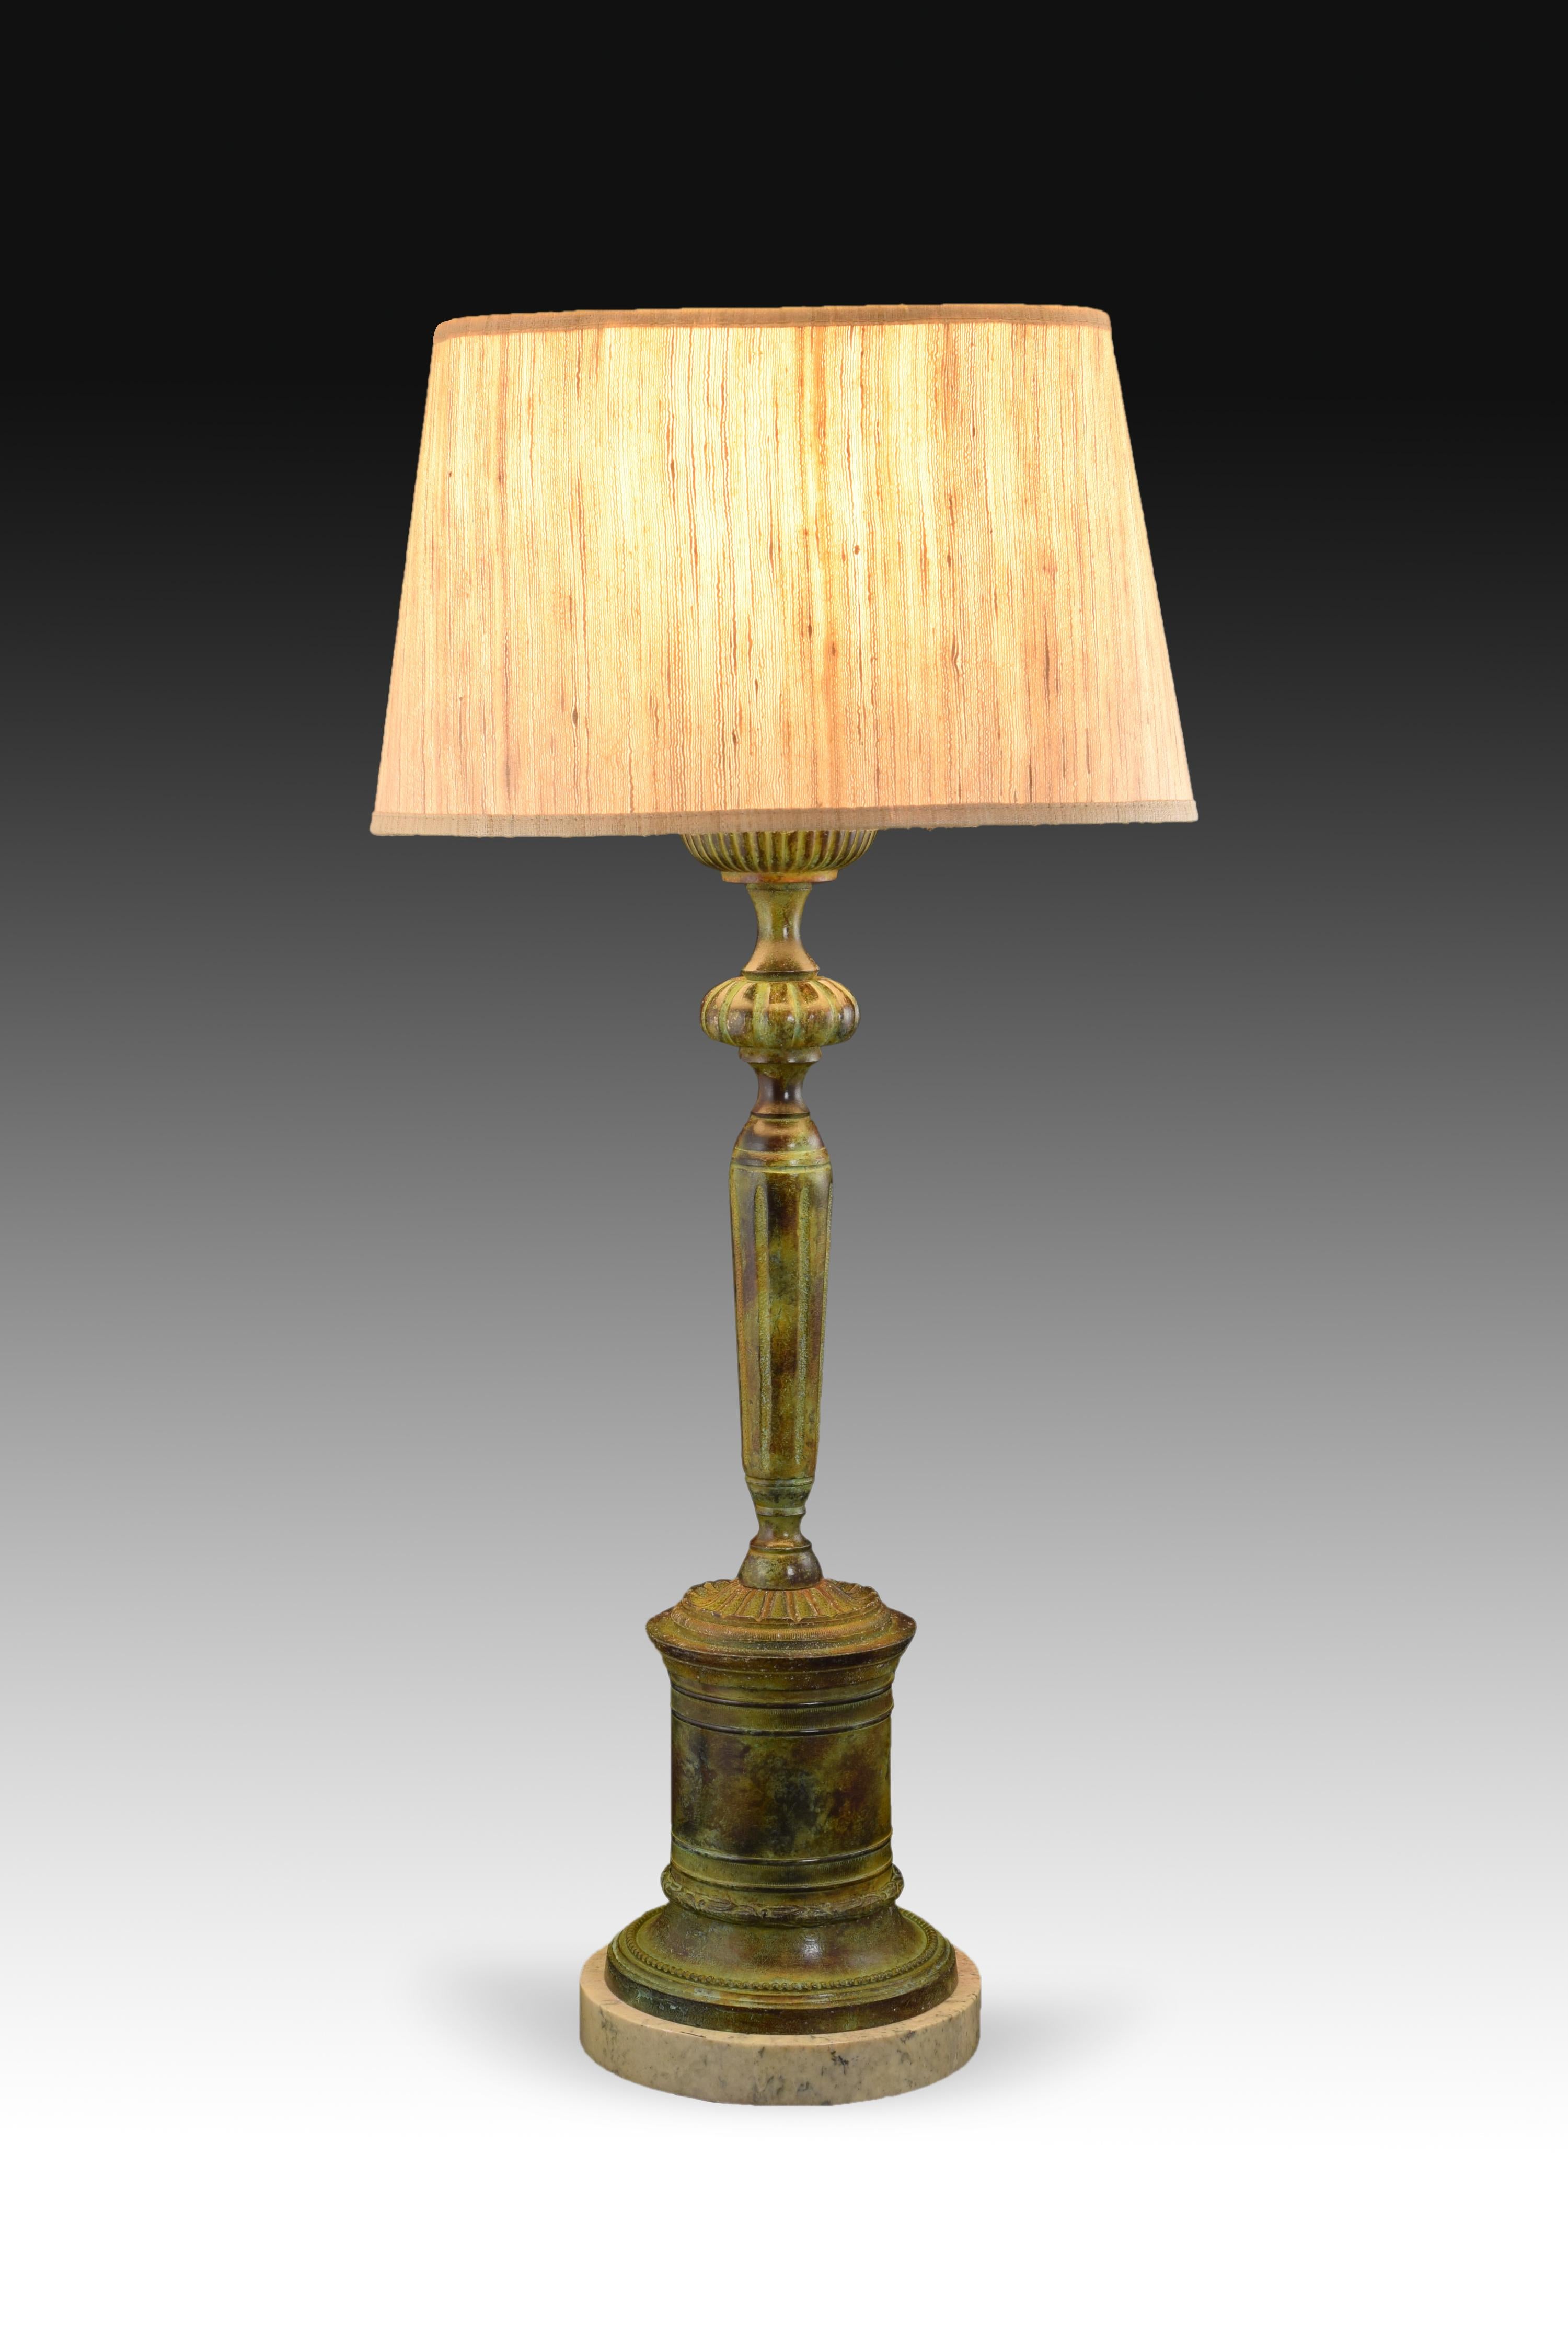 Chandelier shaped lamp, patinated bronze. Marble base. Without screen.
A round base enhances the foot of the lamp: the circular base serves as a podium for a candle-shaped piece and finished off by the base for the bulb; the difference in profiles